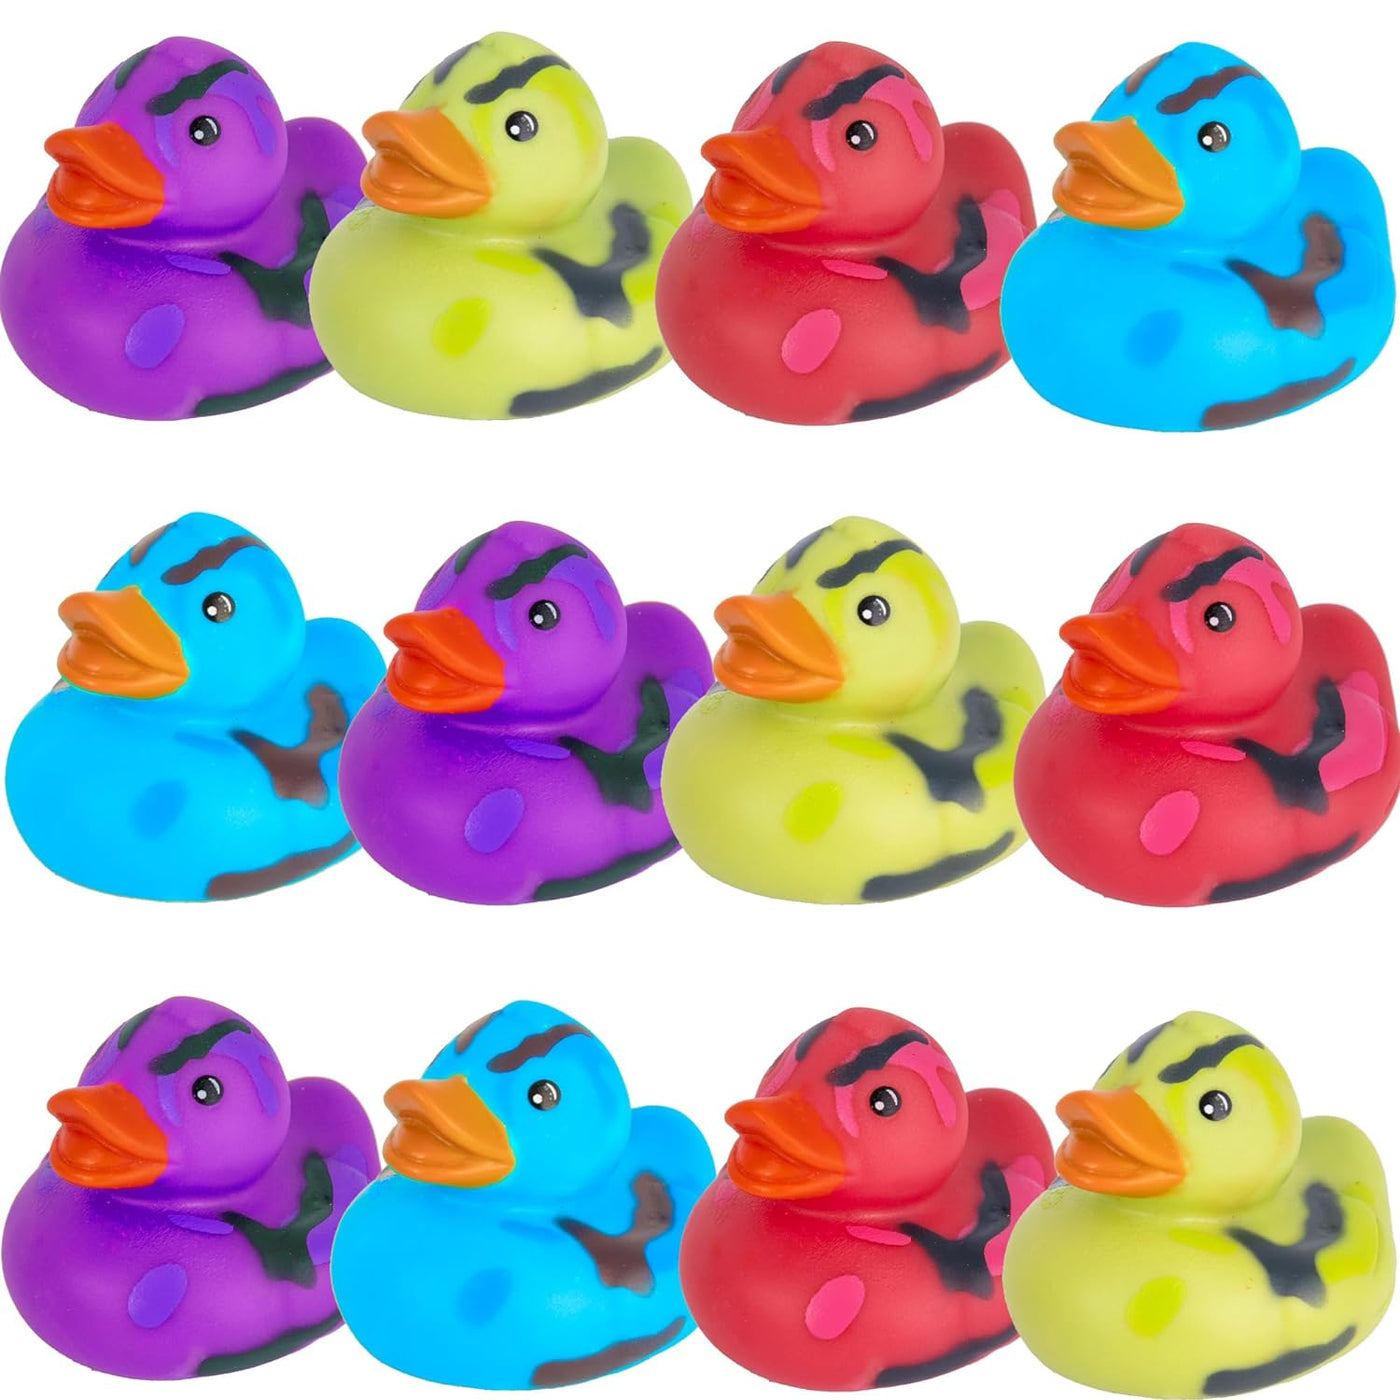 2 Inch Camouflage Rubber Duckies, Pack of 12